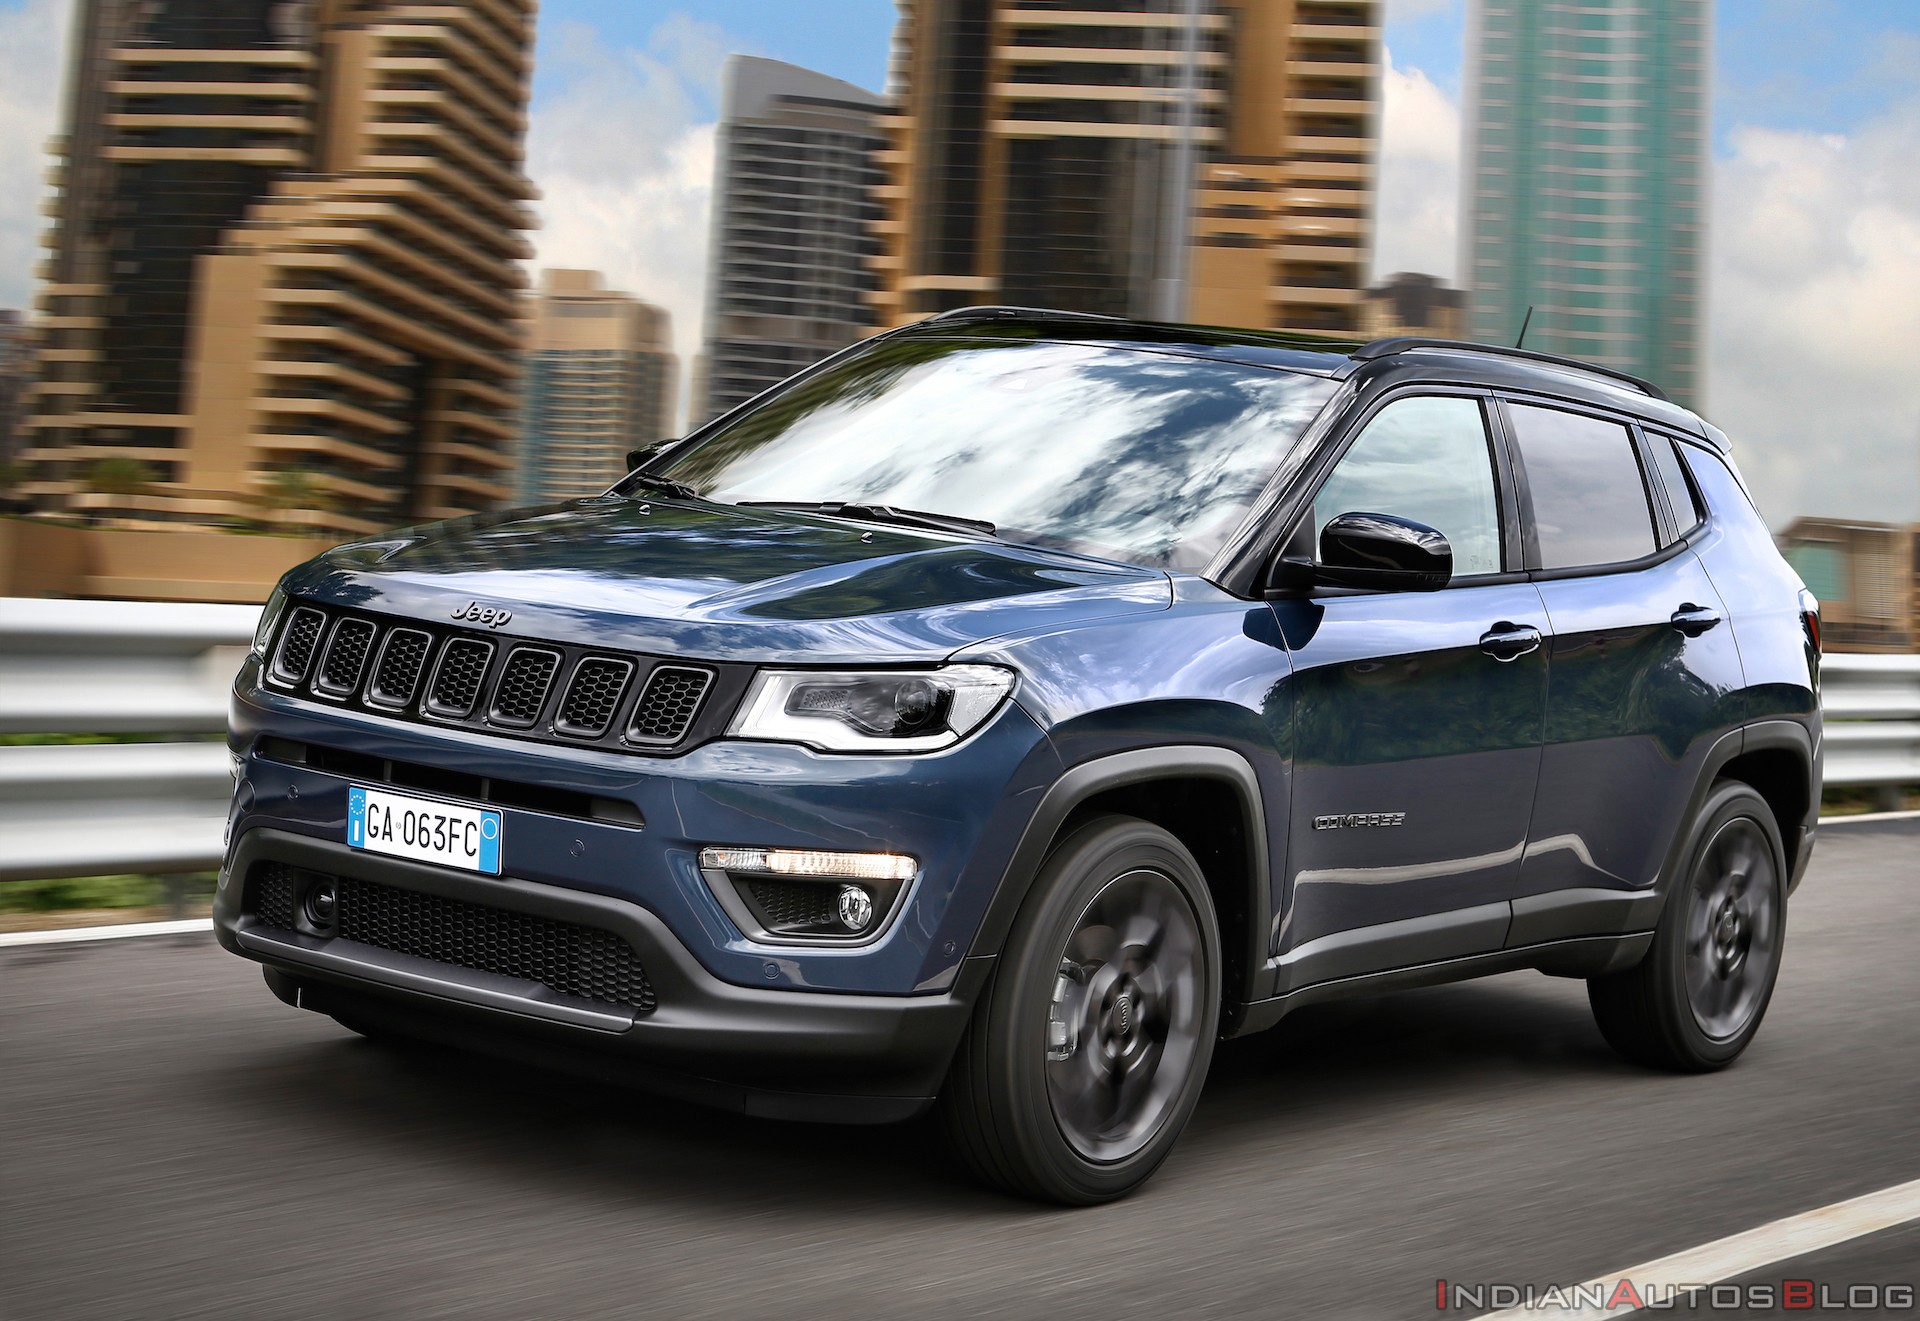 Jeep Compass Gets A Smaller Petrol Engine And More New Technologies Overseas